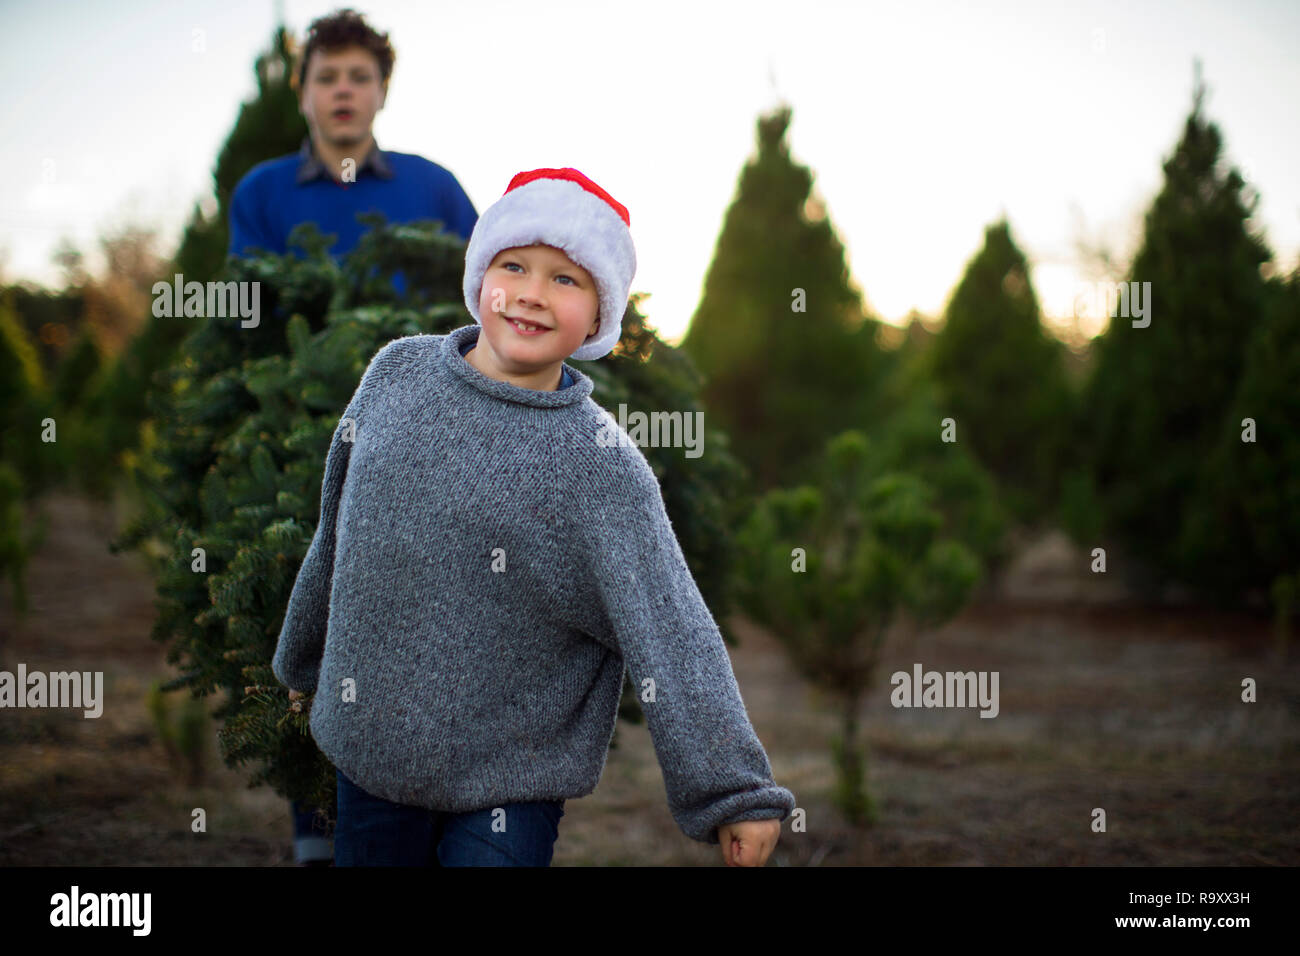 Happy young boy wearing a santa hat looks forward to Christmas as he helps his older brother carry a Christmas tree at the Christmas tree farm. Stock Photo